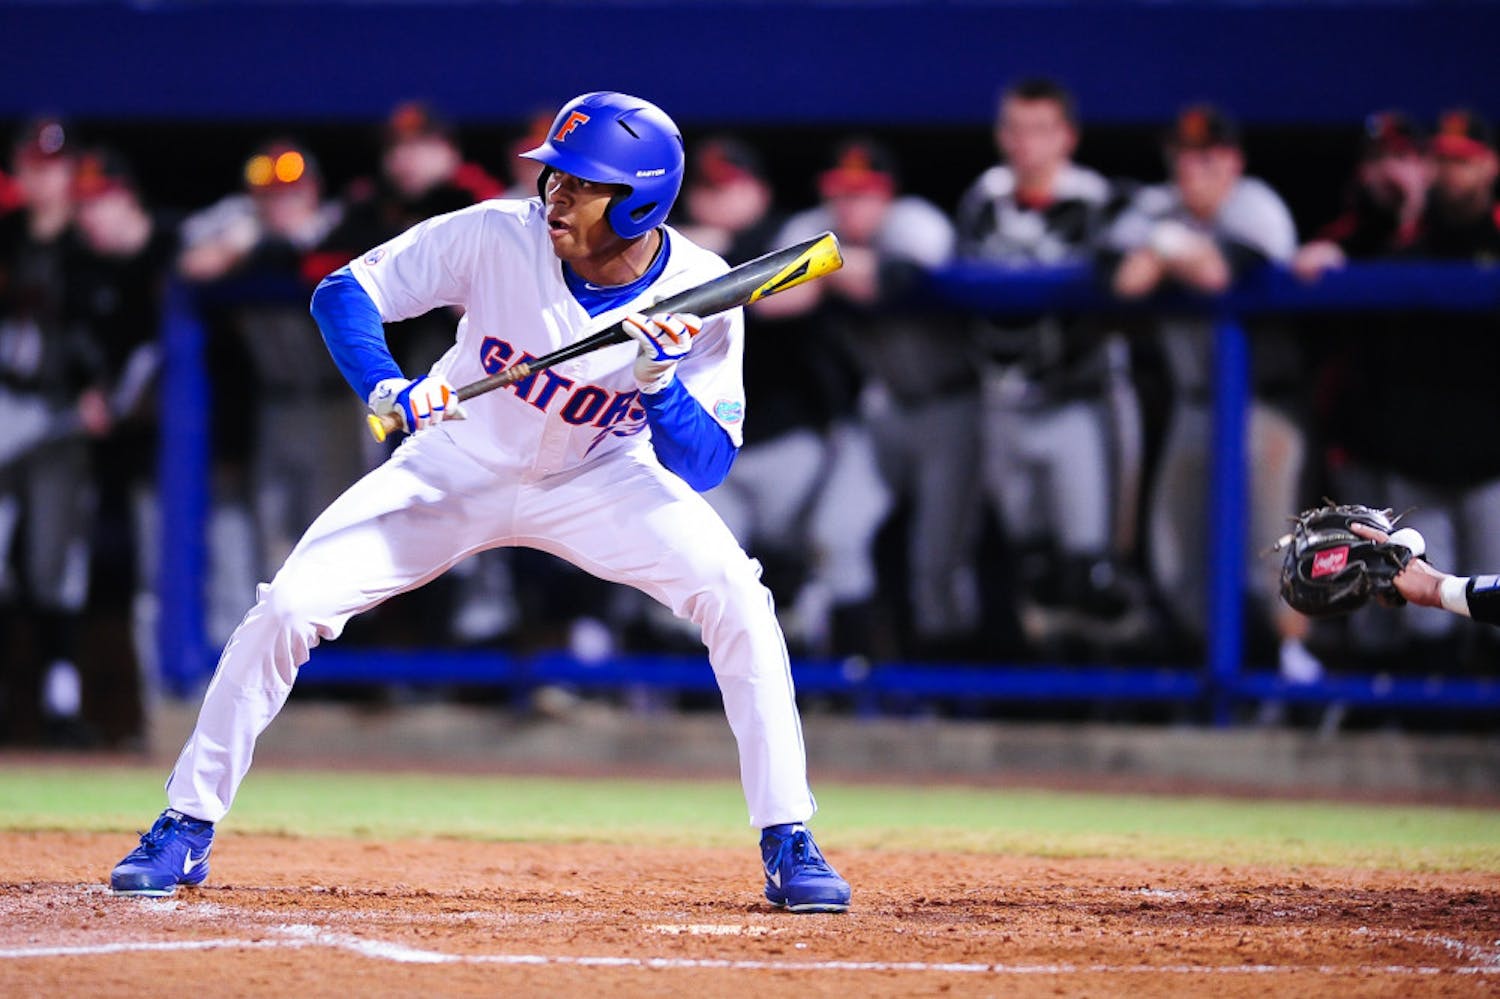 Buddy Reed looks to bunt during Florida's 4-0 win over Maryland.